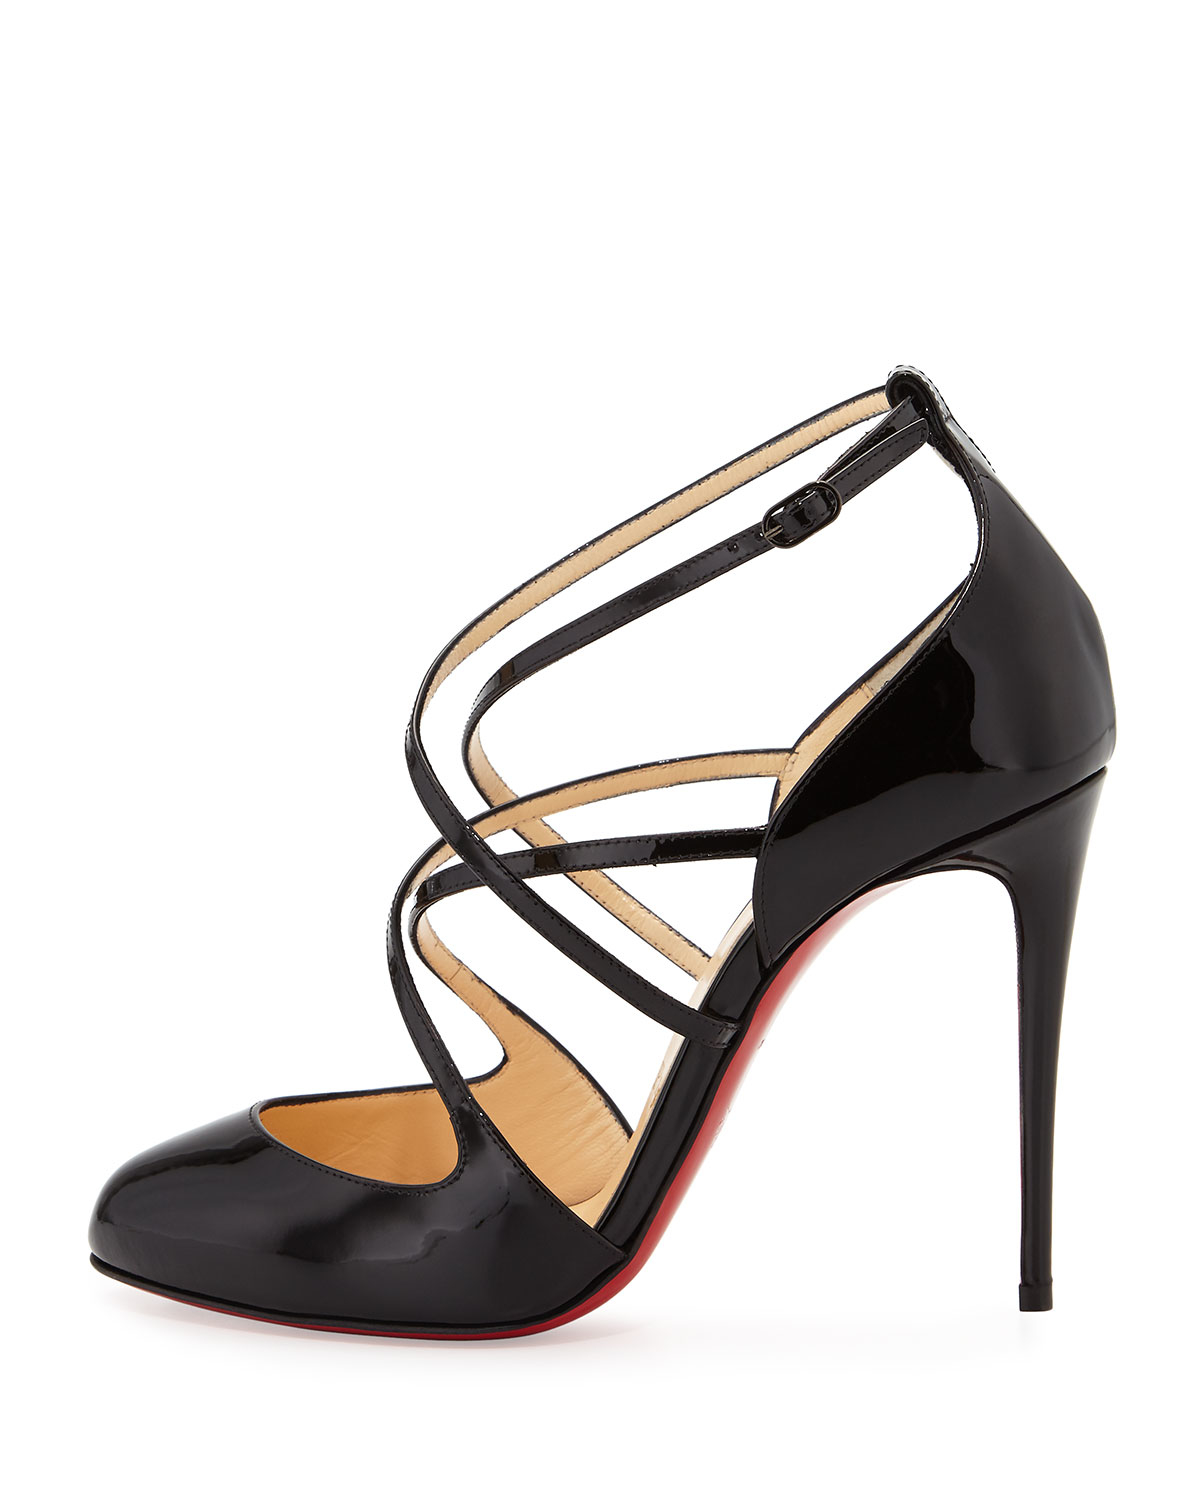 Christian louboutin Soustelissimo Patent-Leather Pumps in Black | Lyst